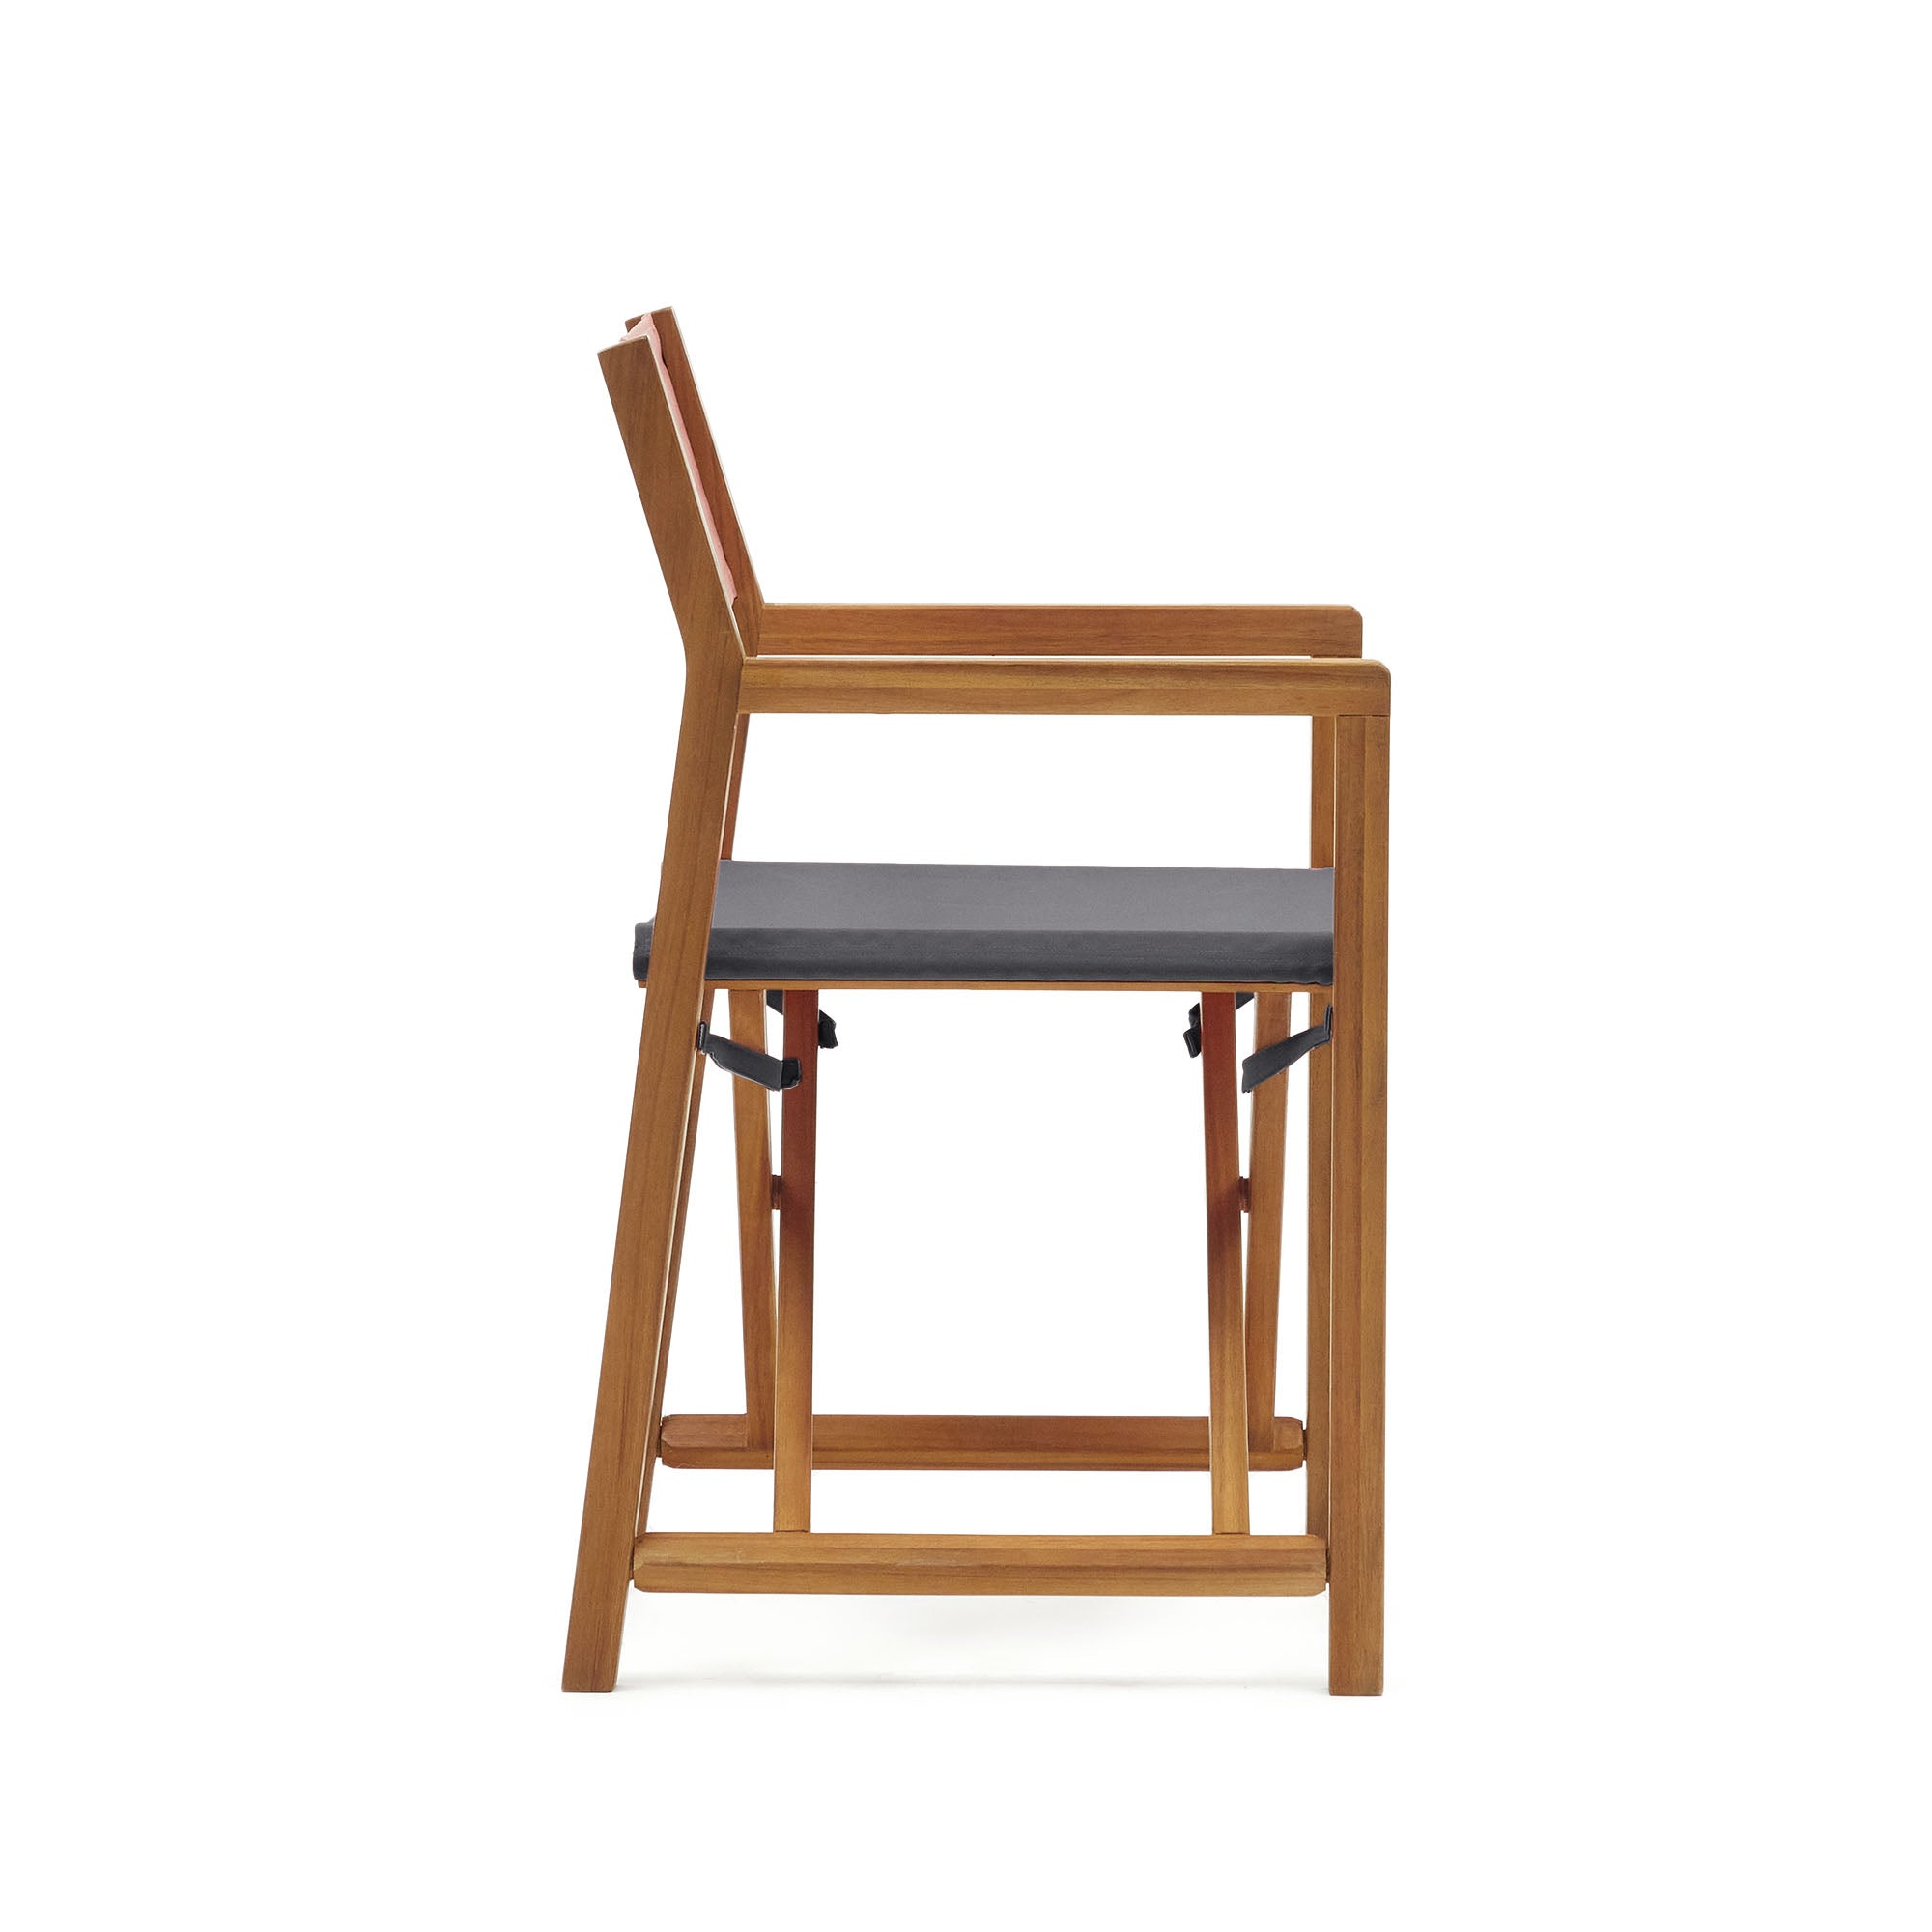 Thianna folding outdoor chair in black with solid acacia wood FSC 100%